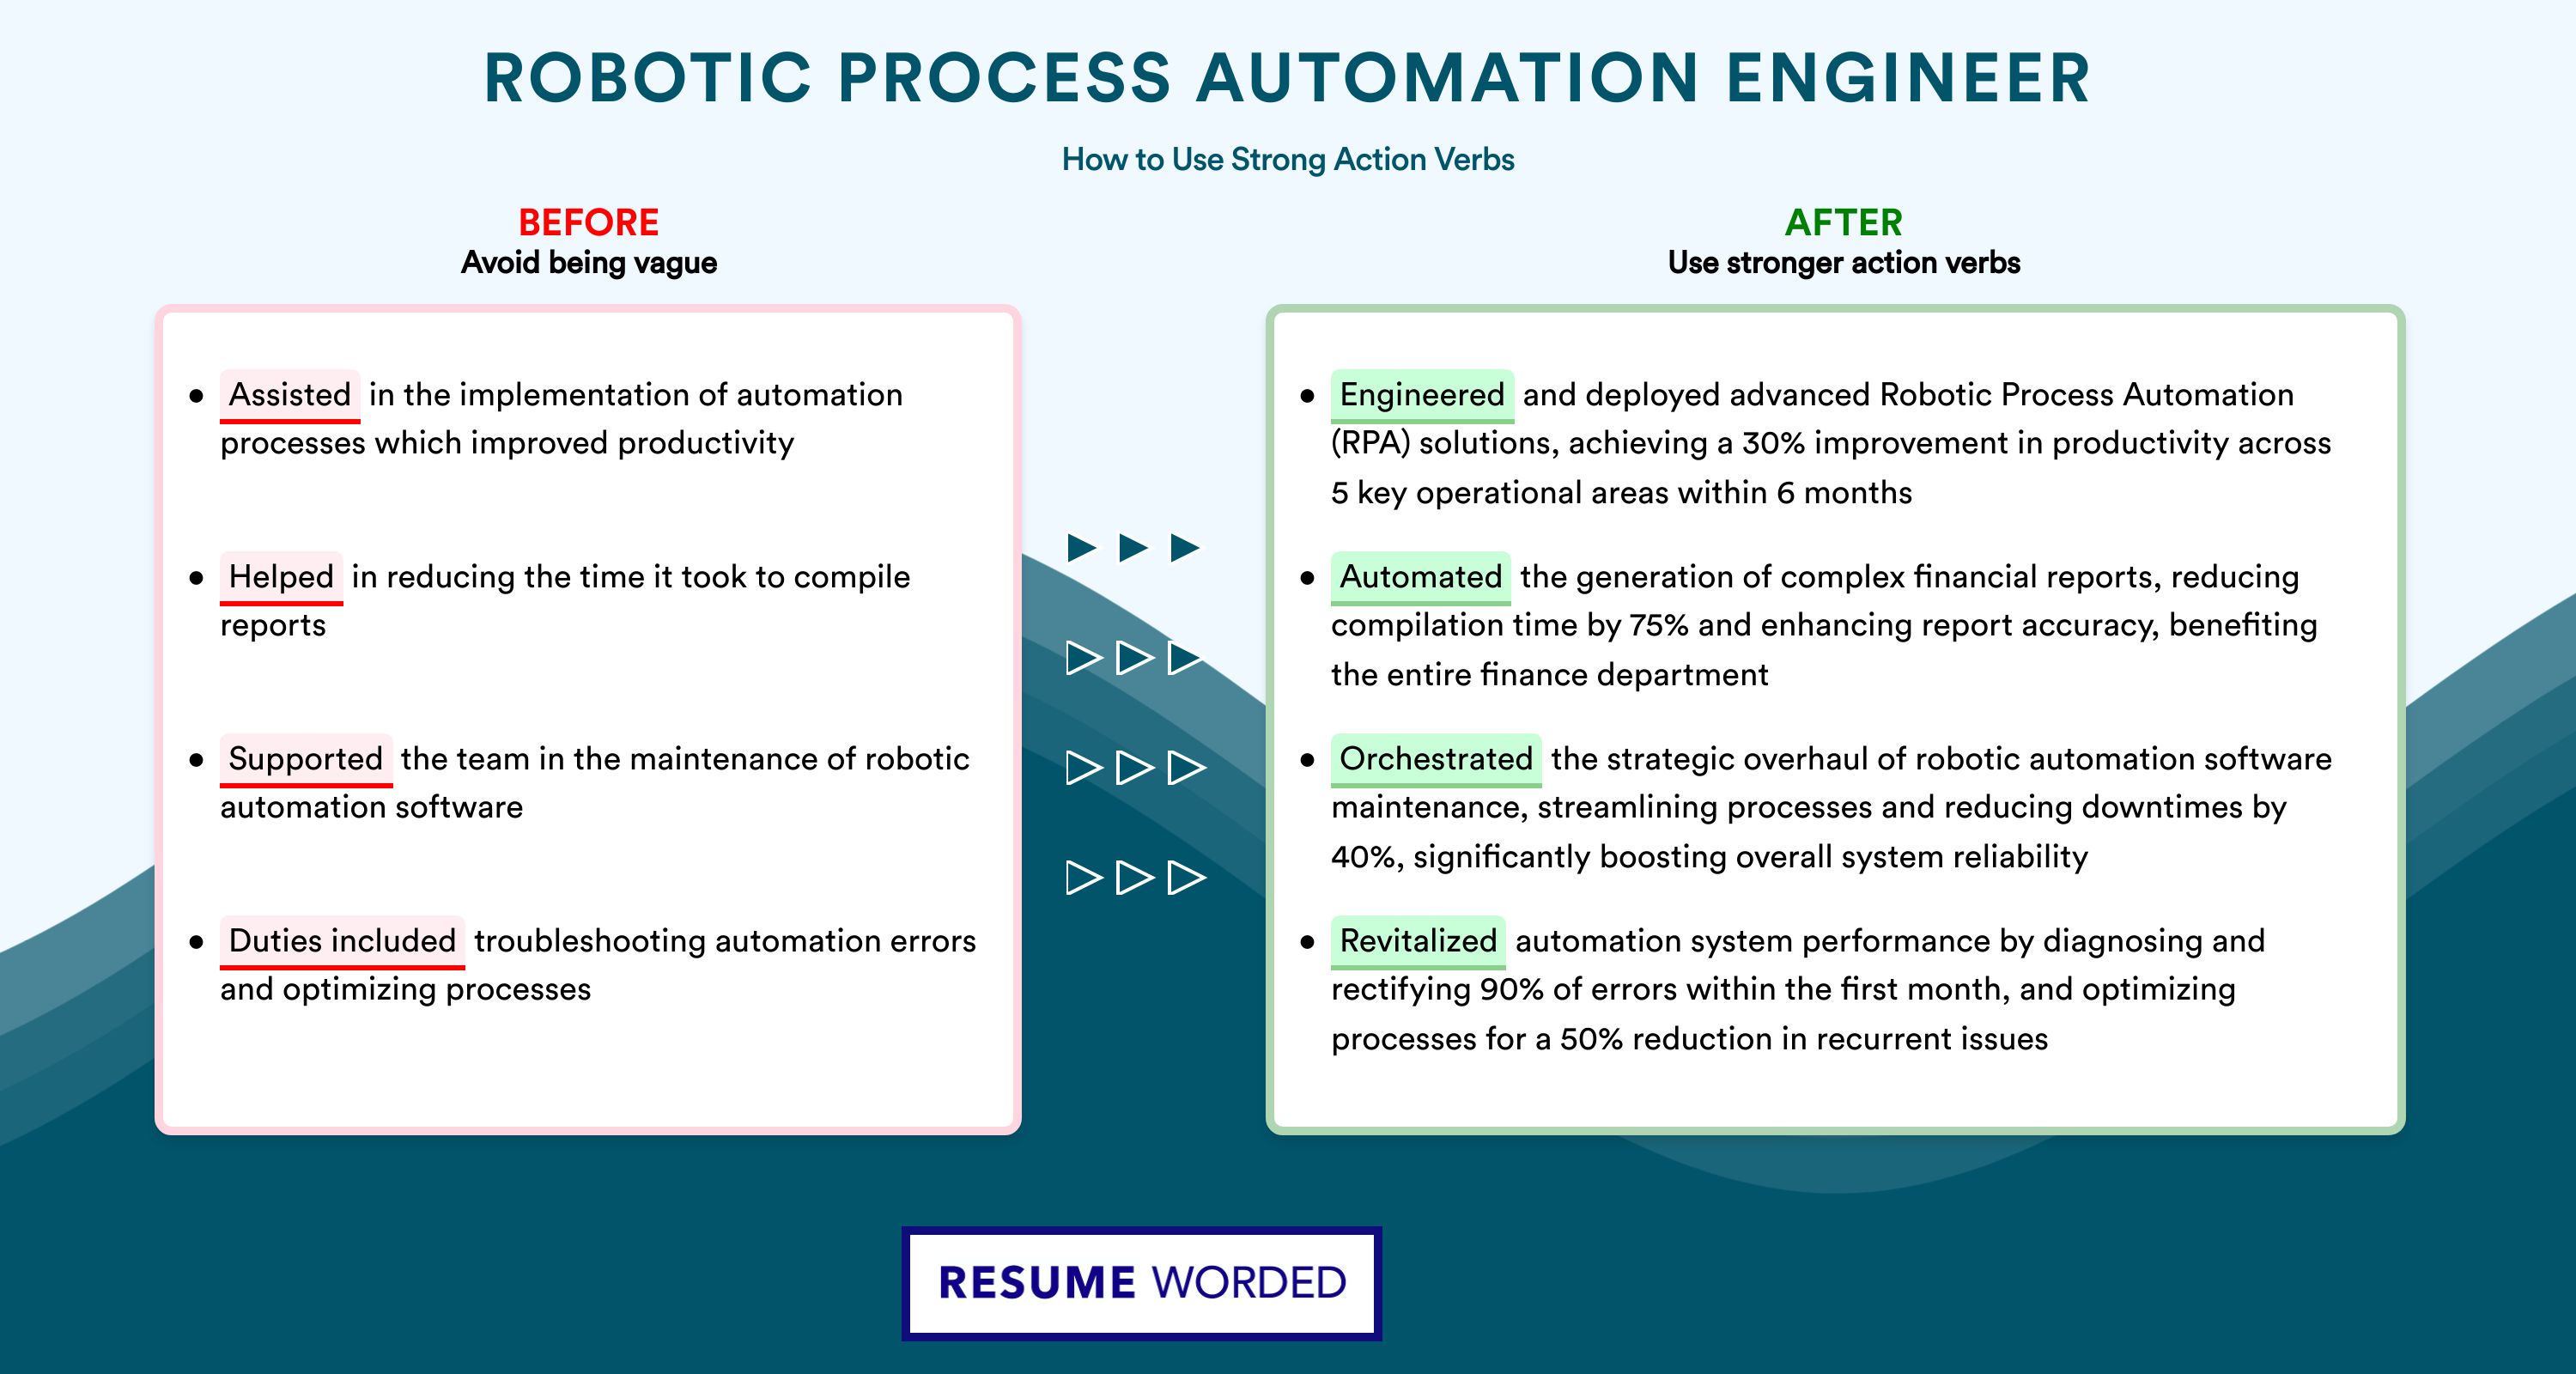 Action Verbs for Robotic Process Automation Engineer